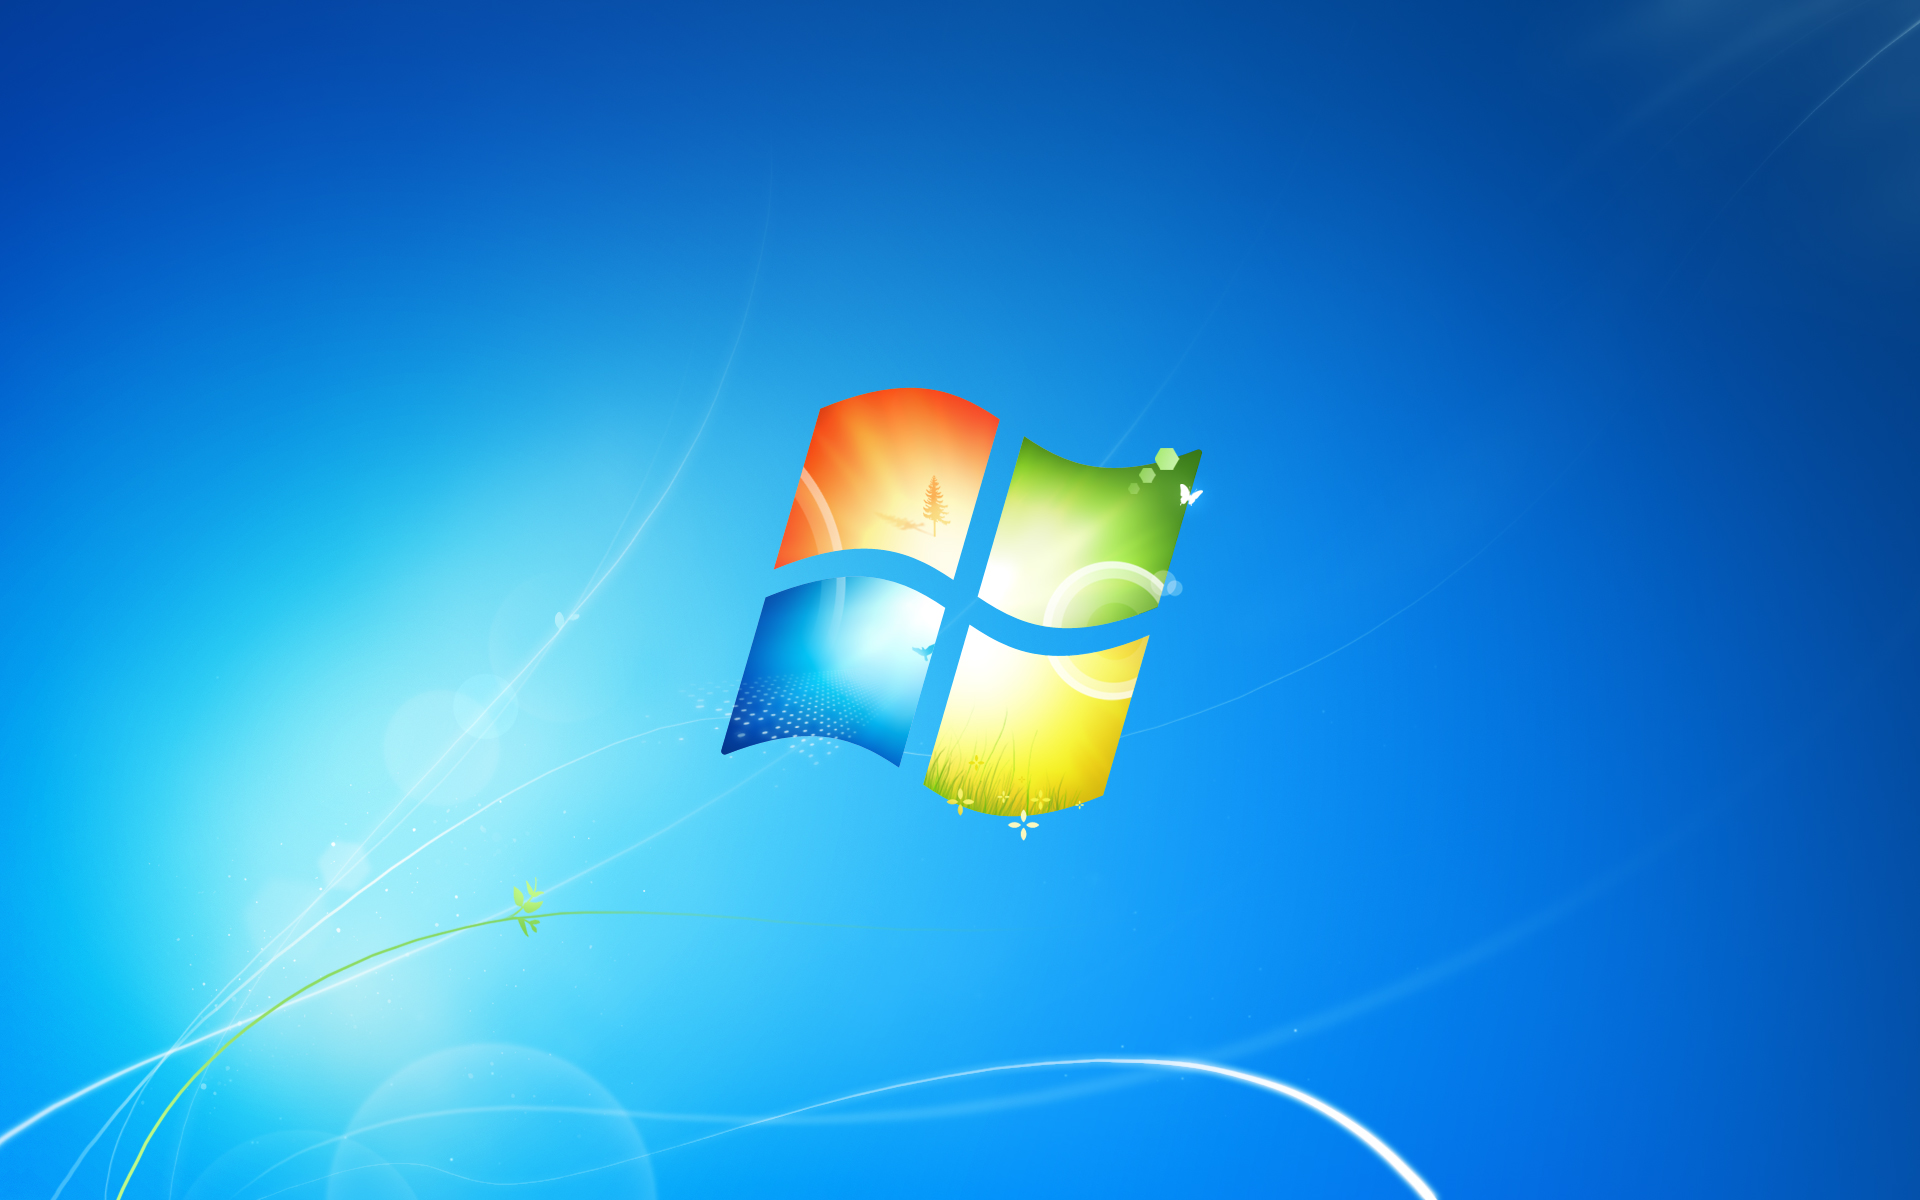 Transform Windows Xp Into Without Using Customization Pack